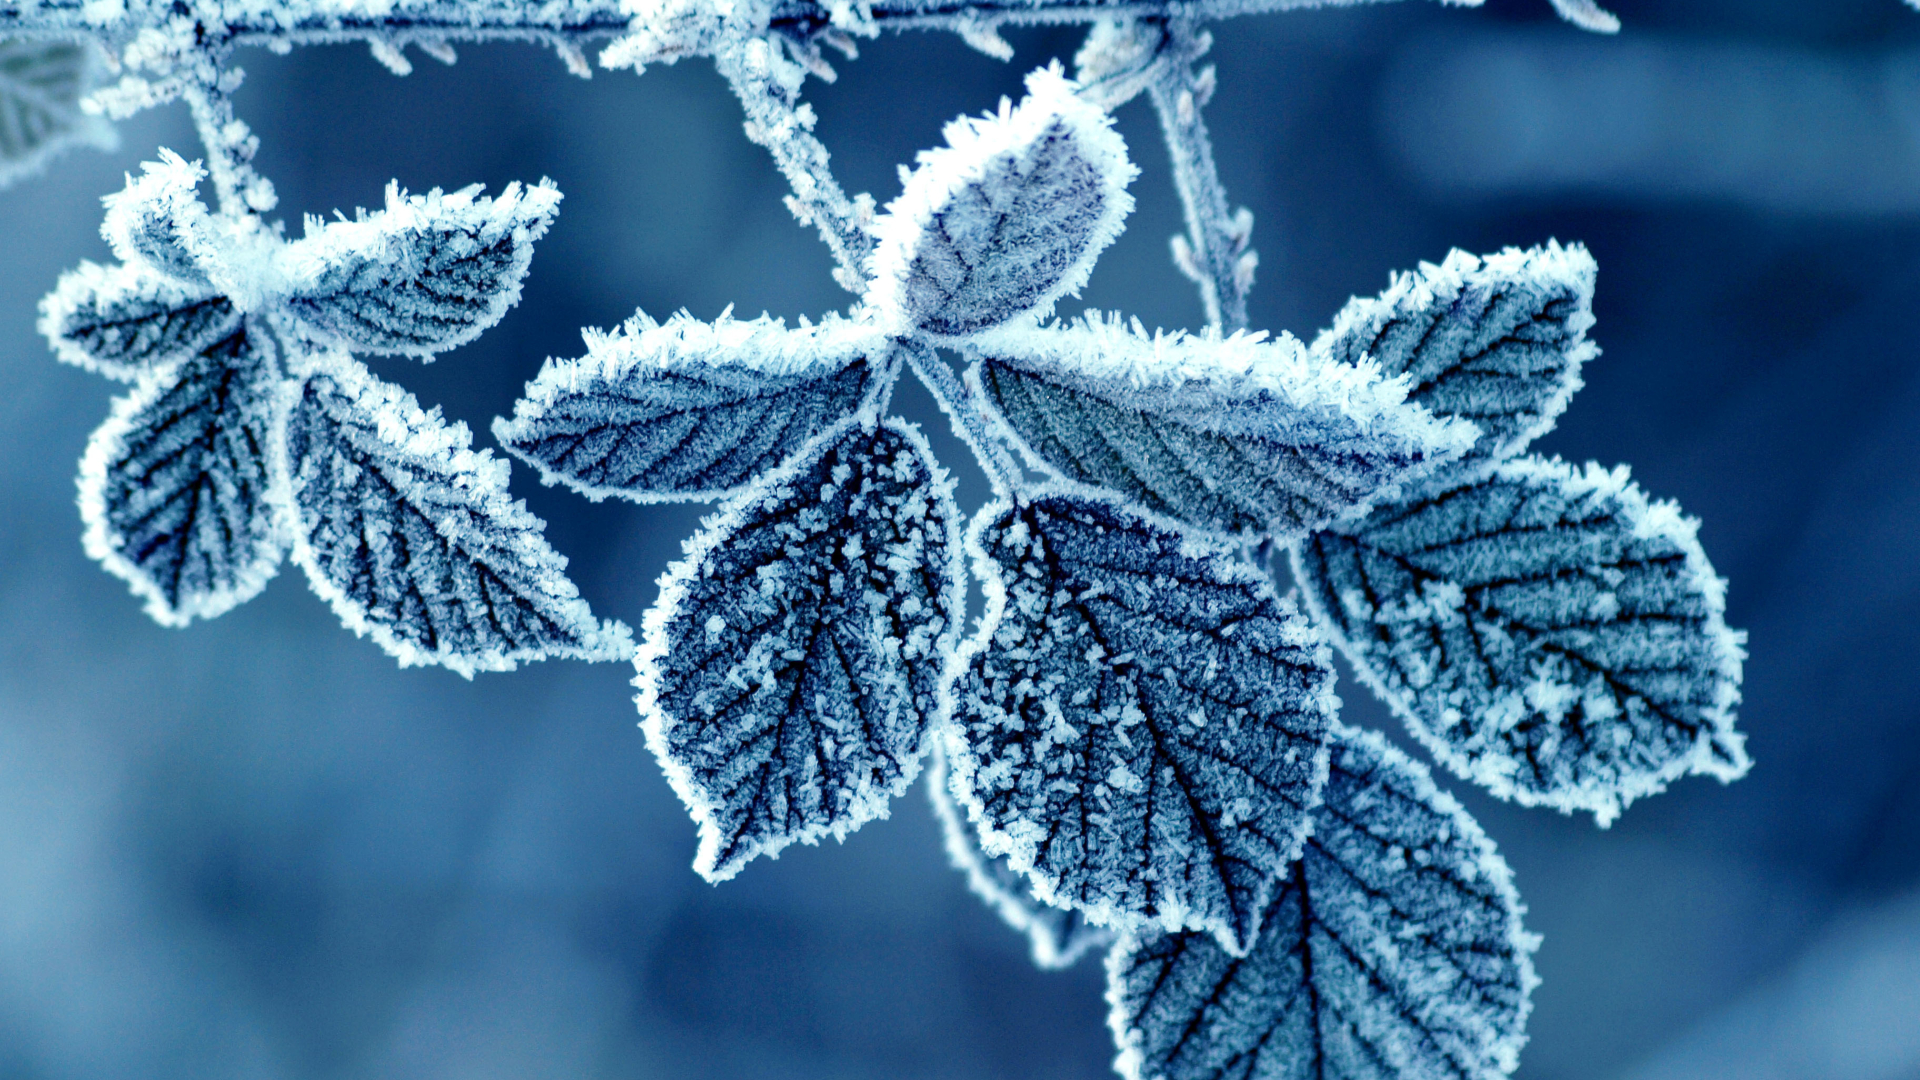 your name wallpaper,frost,blue,leaf,freezing,winter